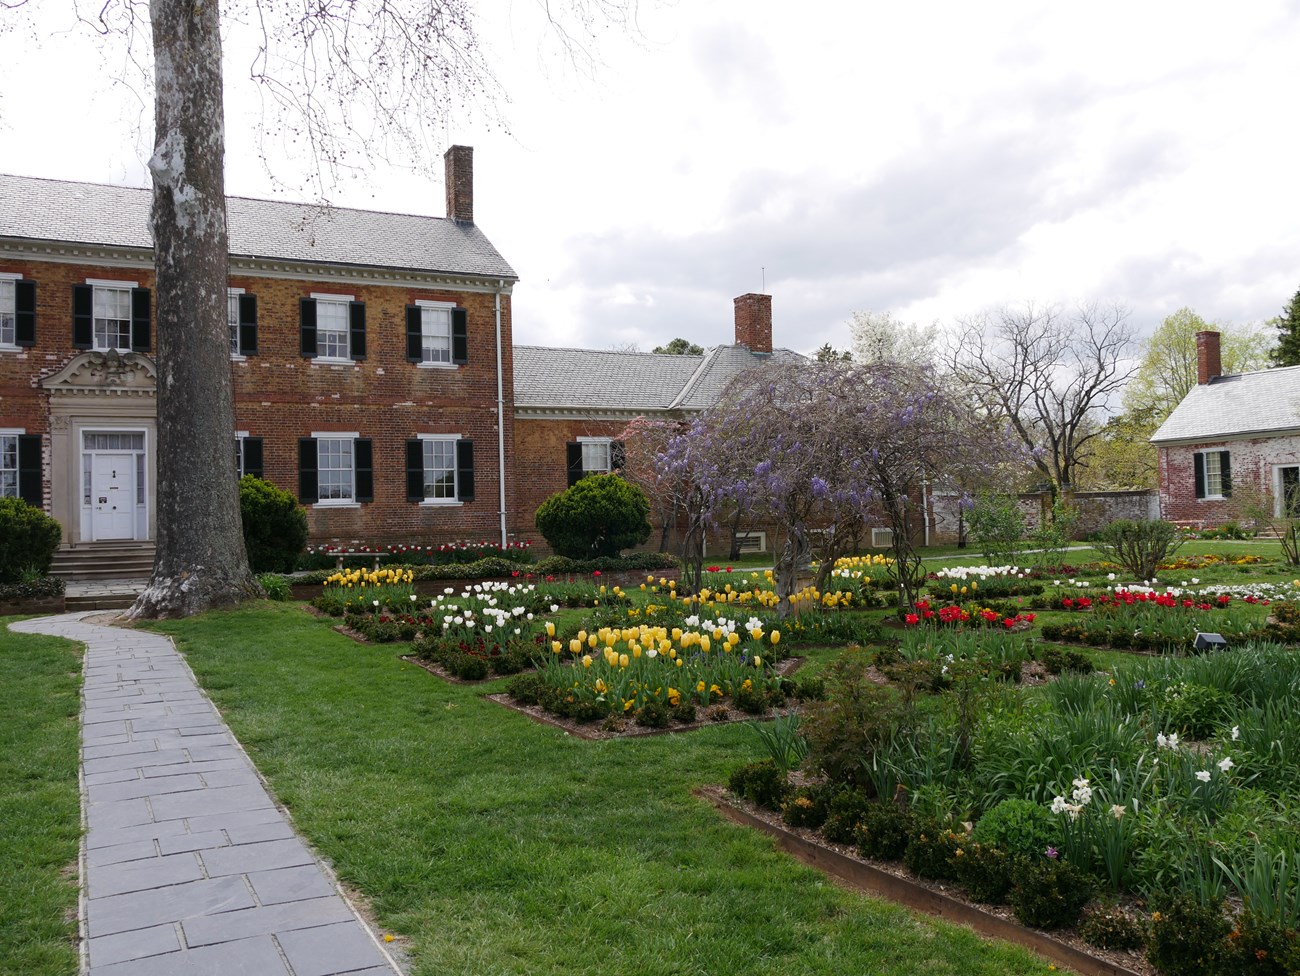 An image showing the a blossoming garden in front of the estate